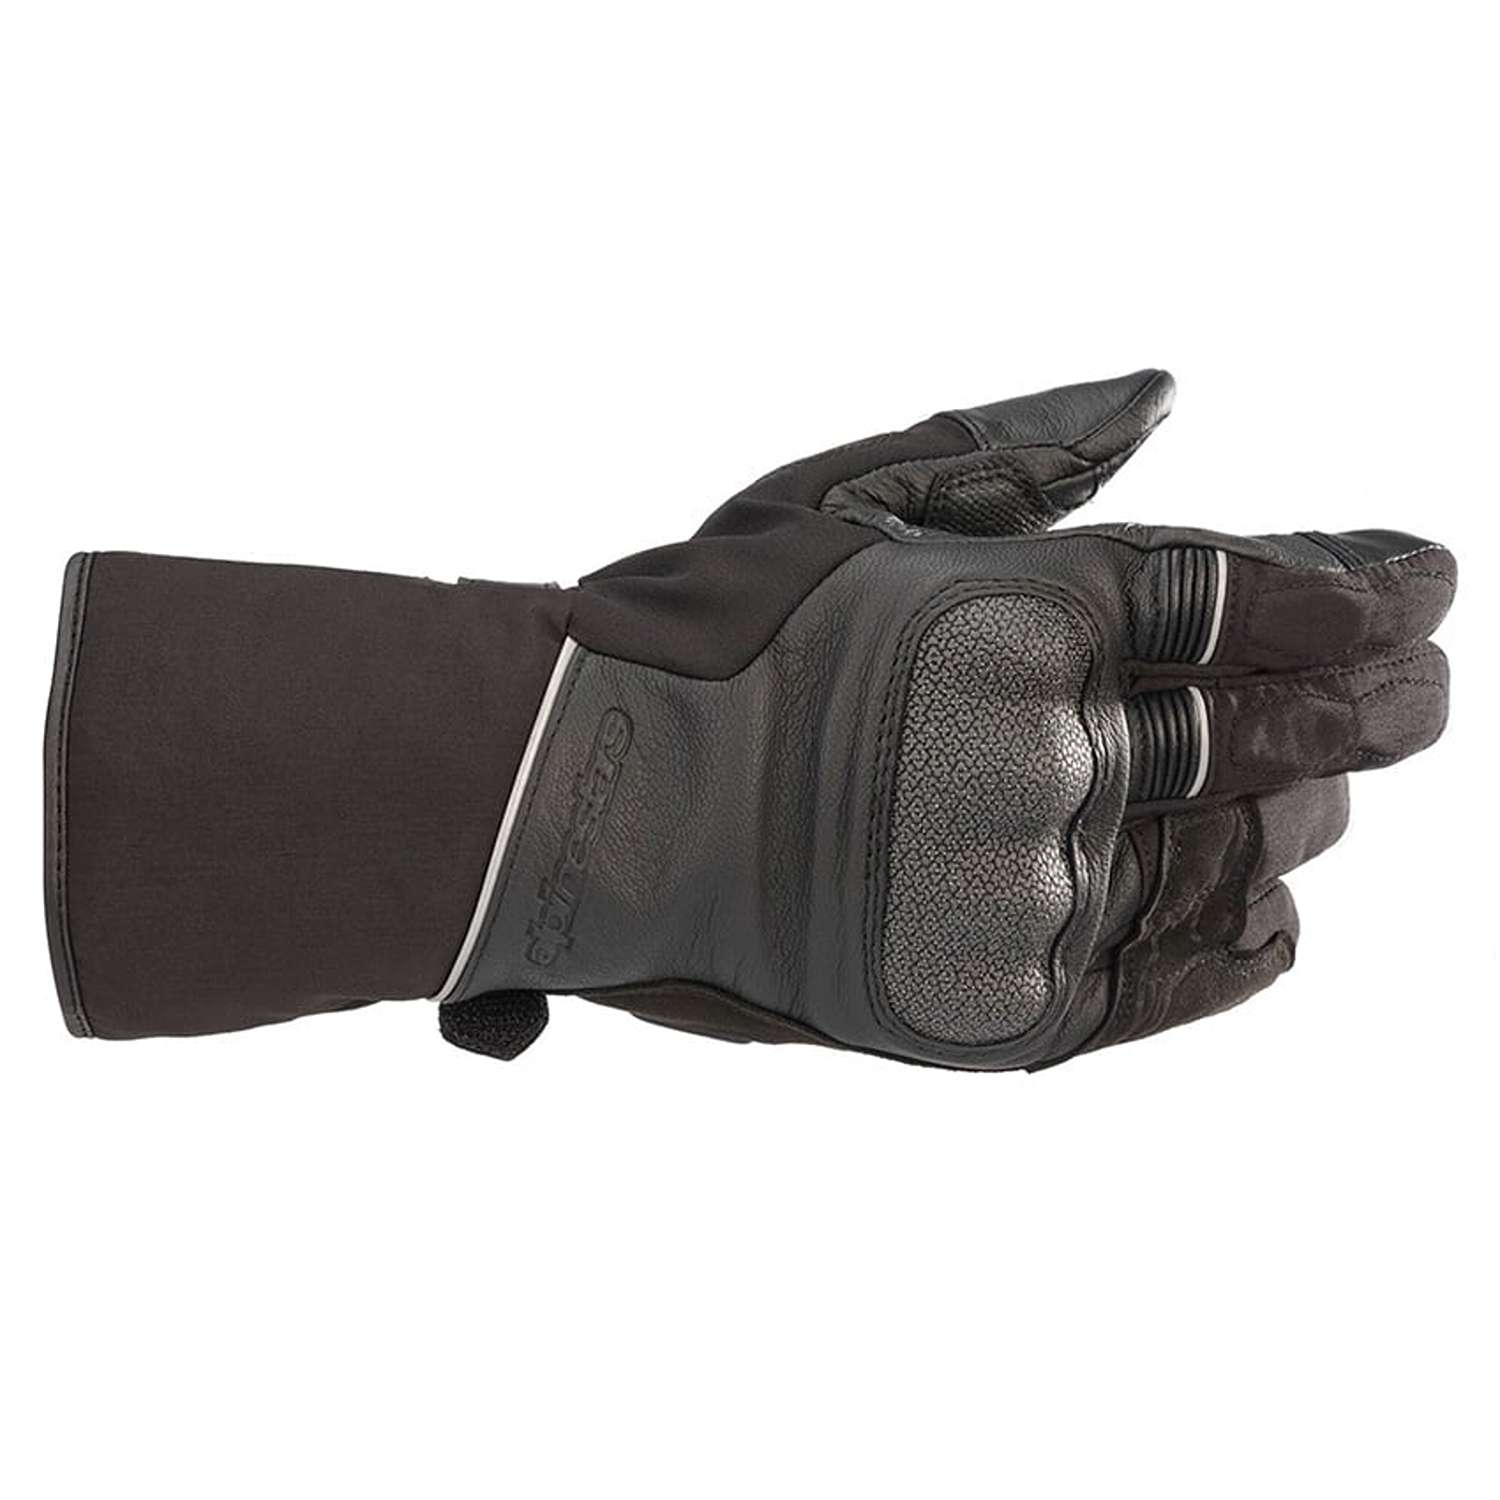 Image of Alpinestars Wr-2 V2 Gore-Tex Gloves With Gore Grip Technology Black Size XL ID 8059175098543